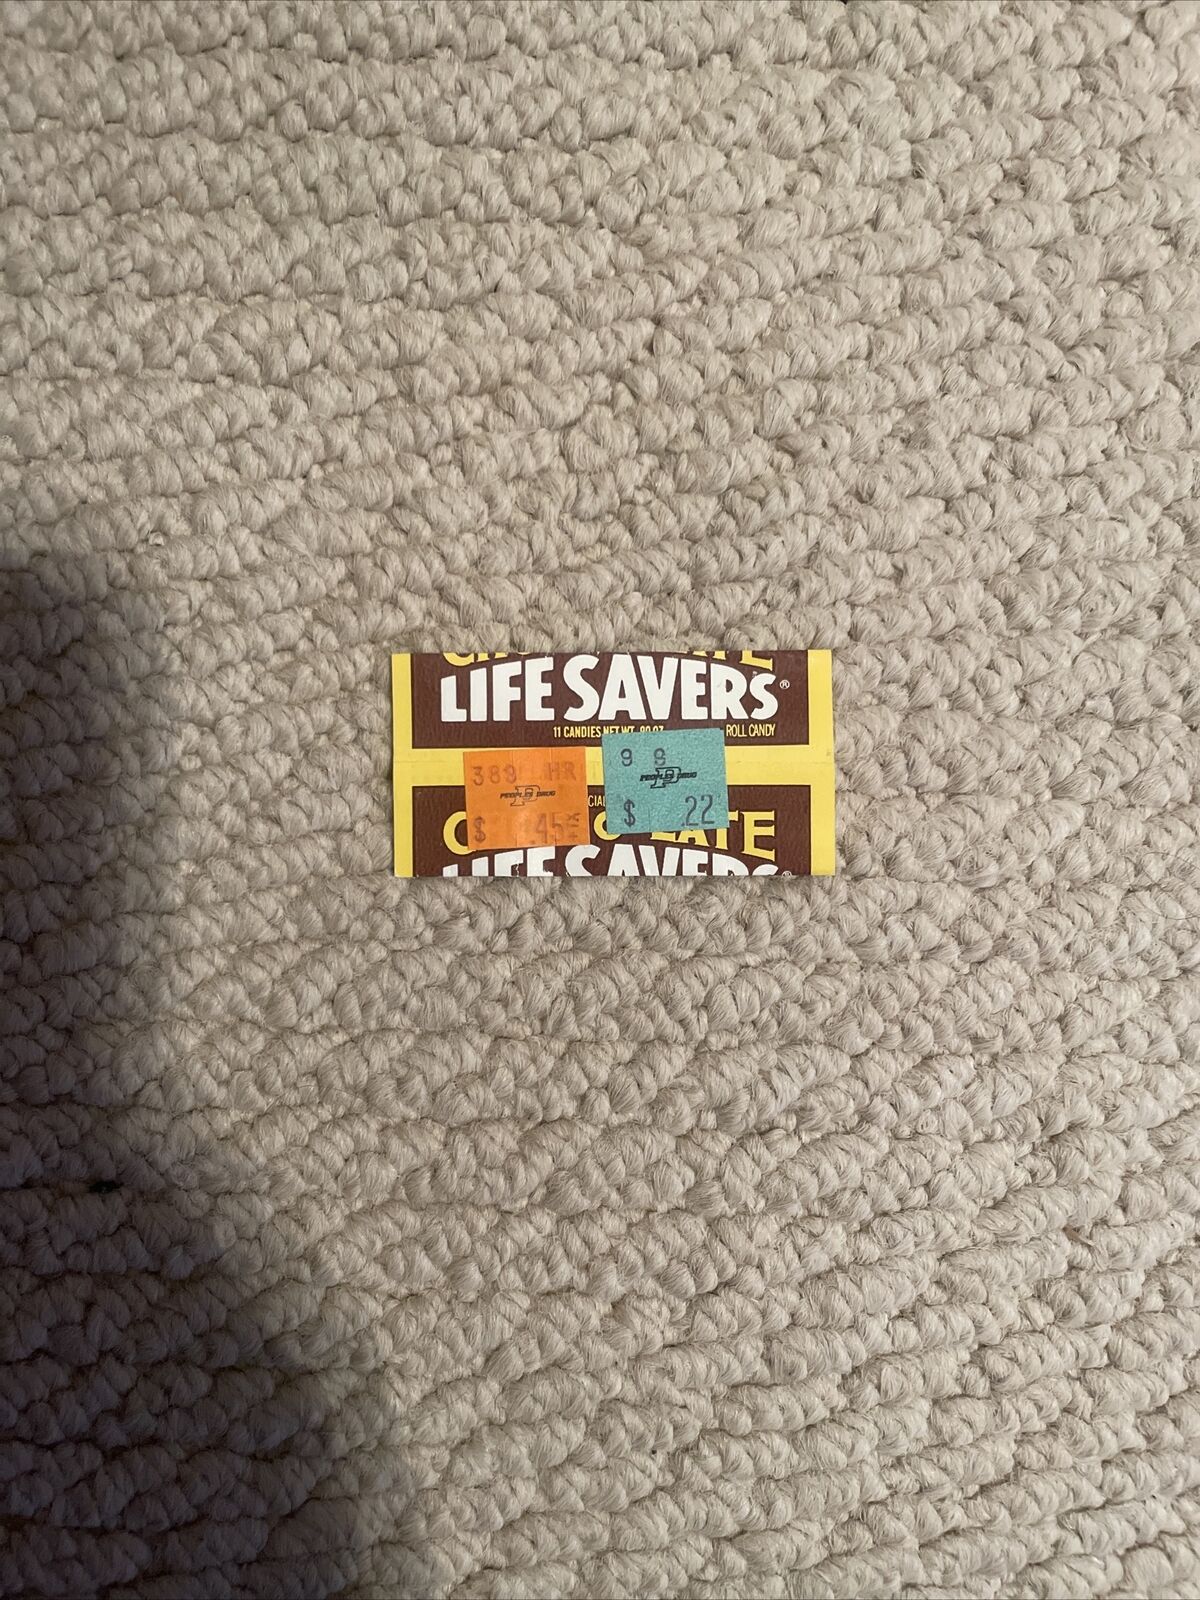 Rare Vintage 1980s Discontinued Chocolate Lifesavers Wrapper